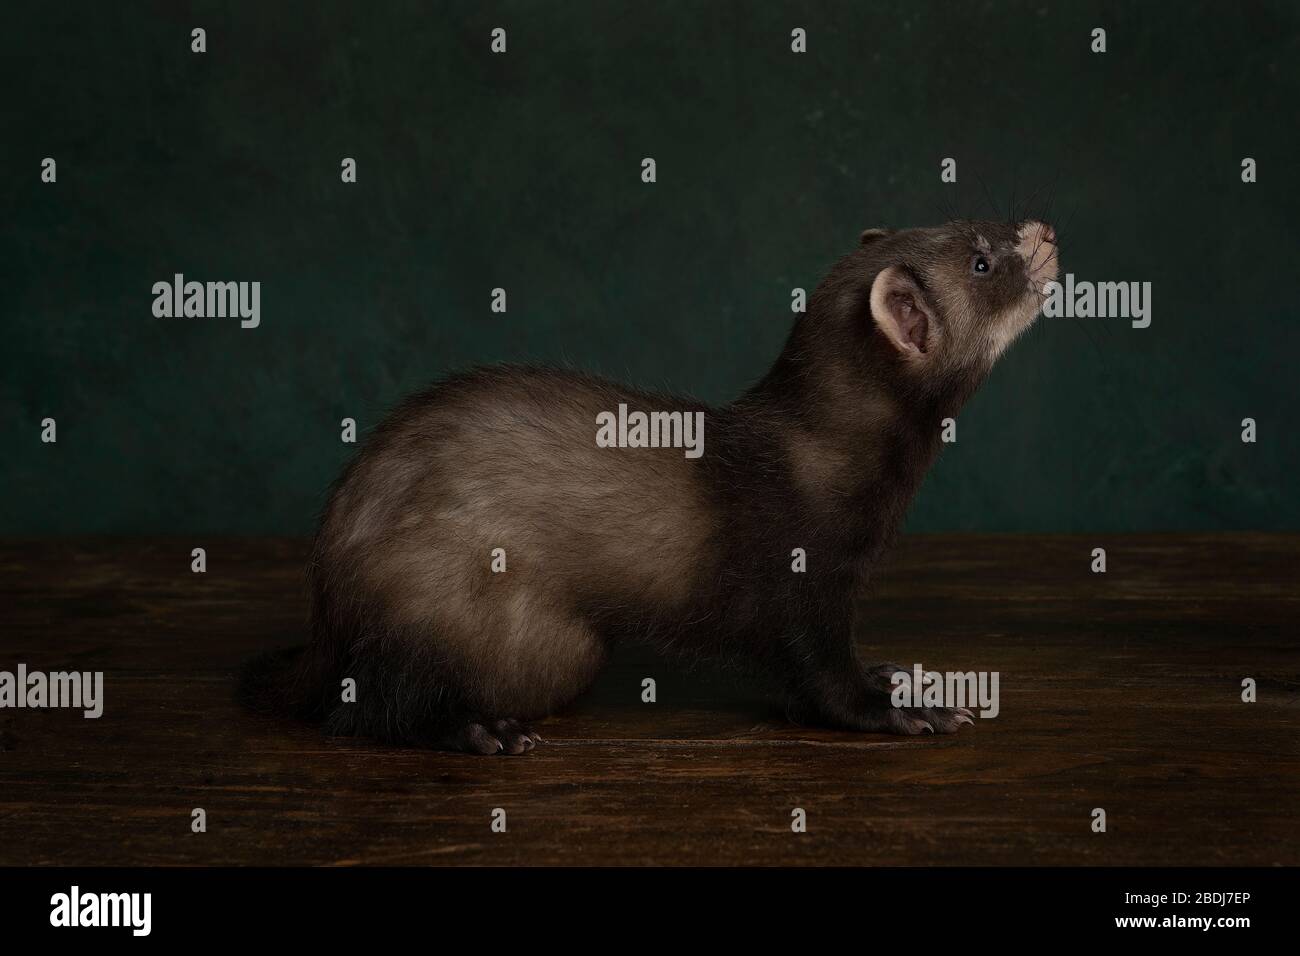 Young ferret or polecat puppy full body in a stillife scene looking up against a green background Stock Photo